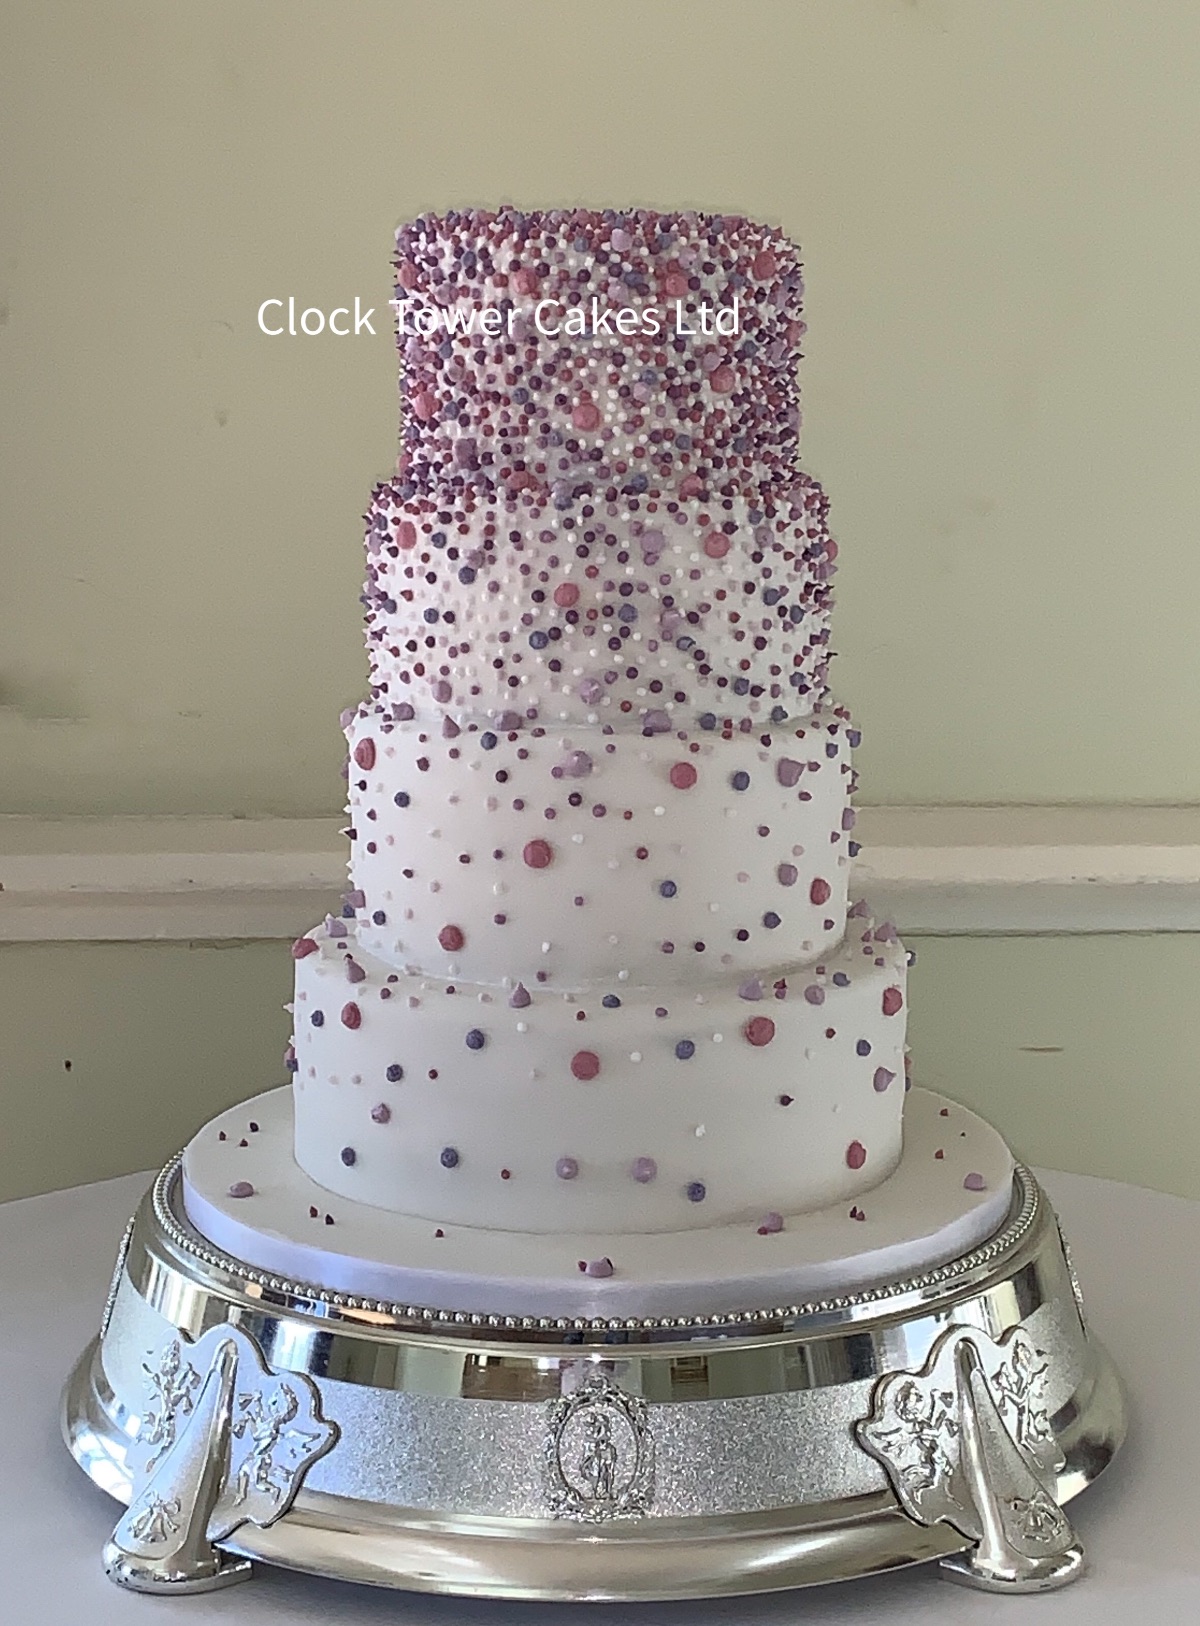 Clock Tower Cakes-Image-12